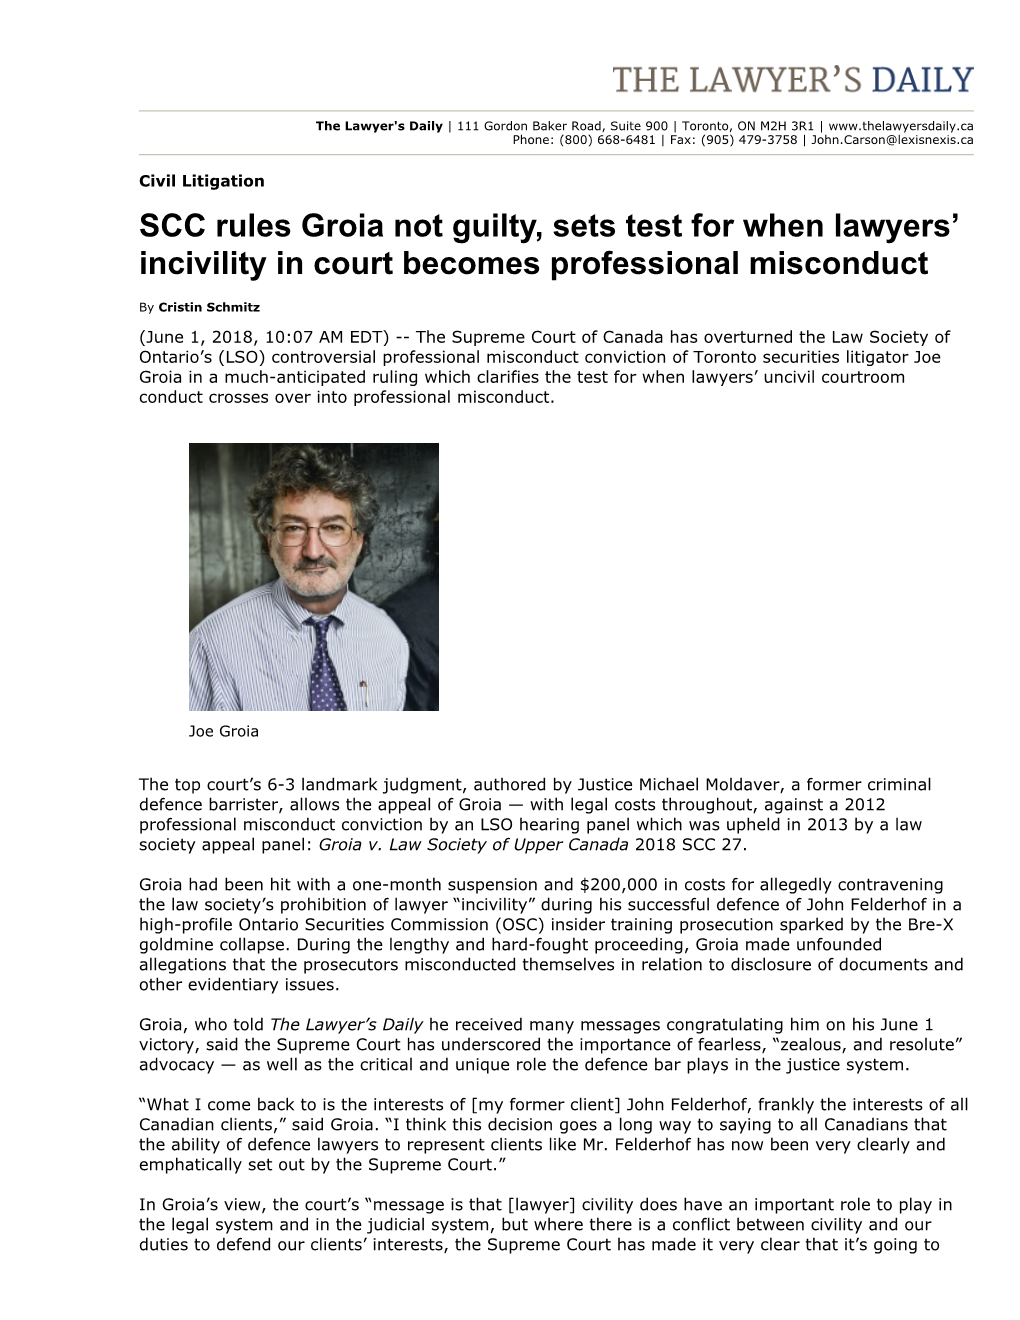 SCC Rules Groia Not Guilty, Sets Test for When Lawyers' Incivility in Court